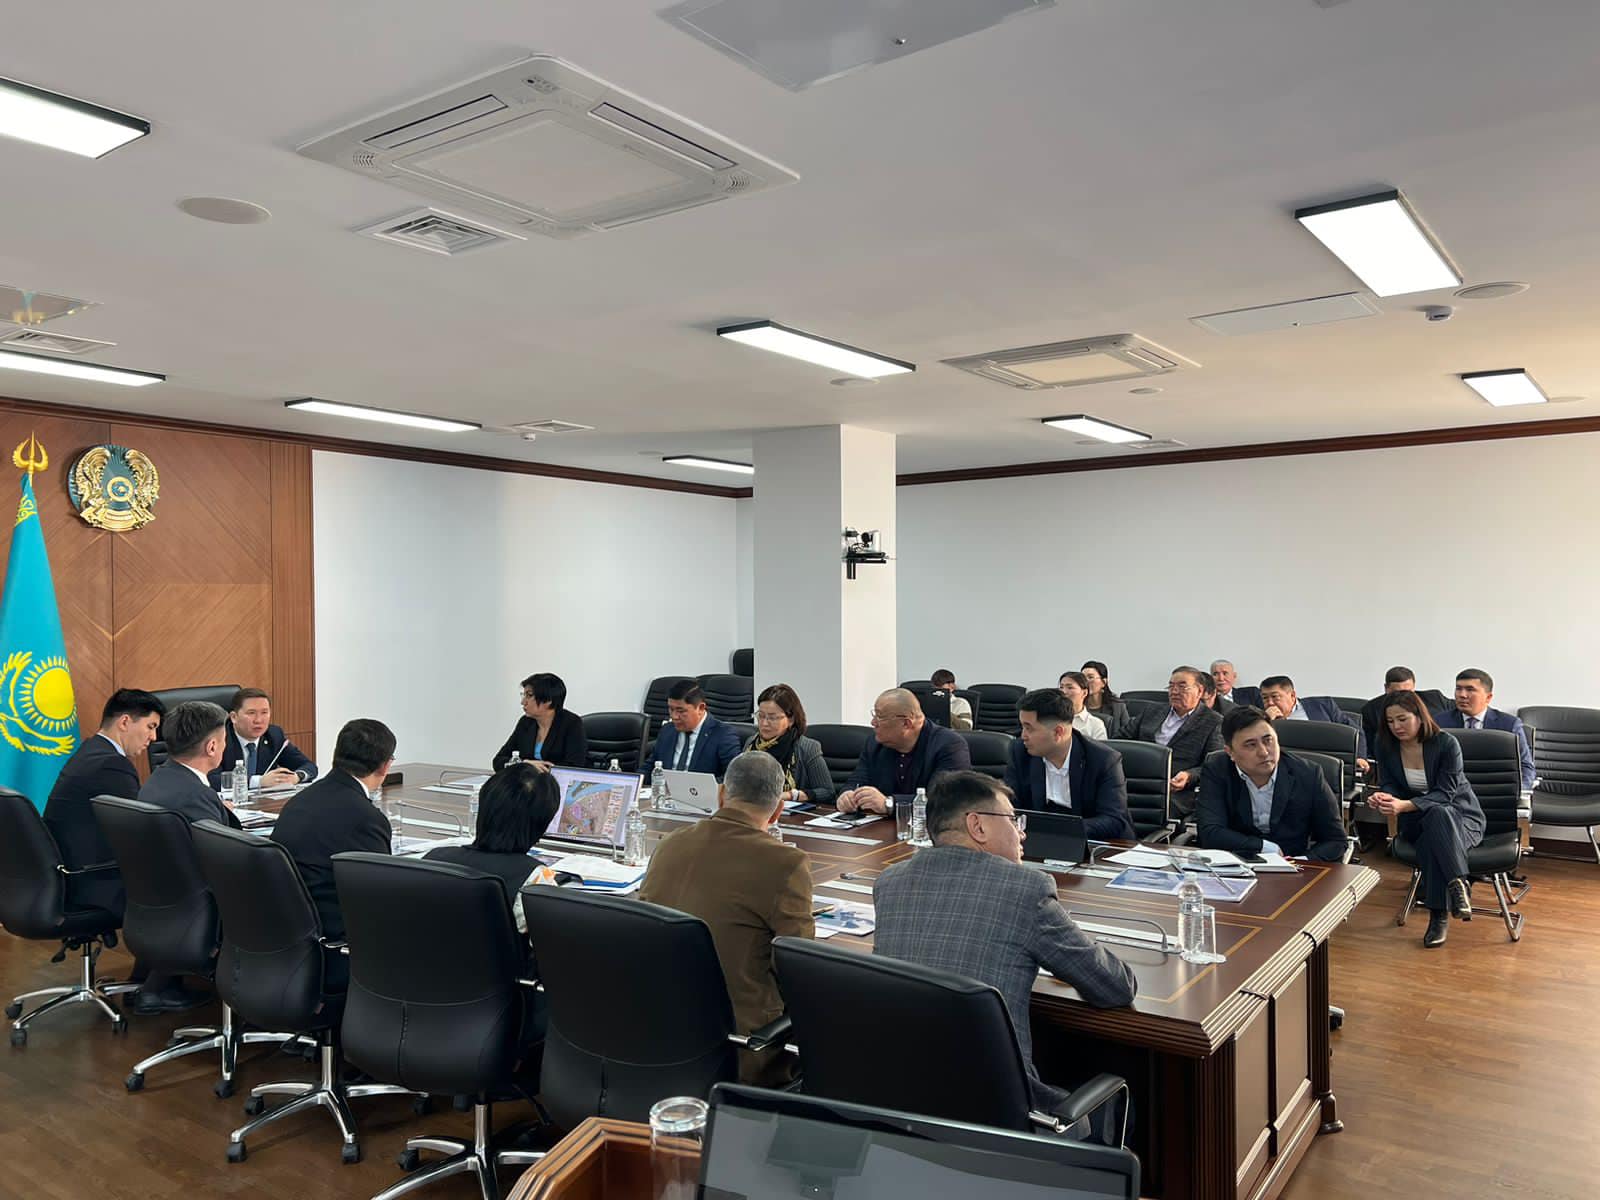 Development plan of the Saraishyq was discussed in the akimat of Atyrau region